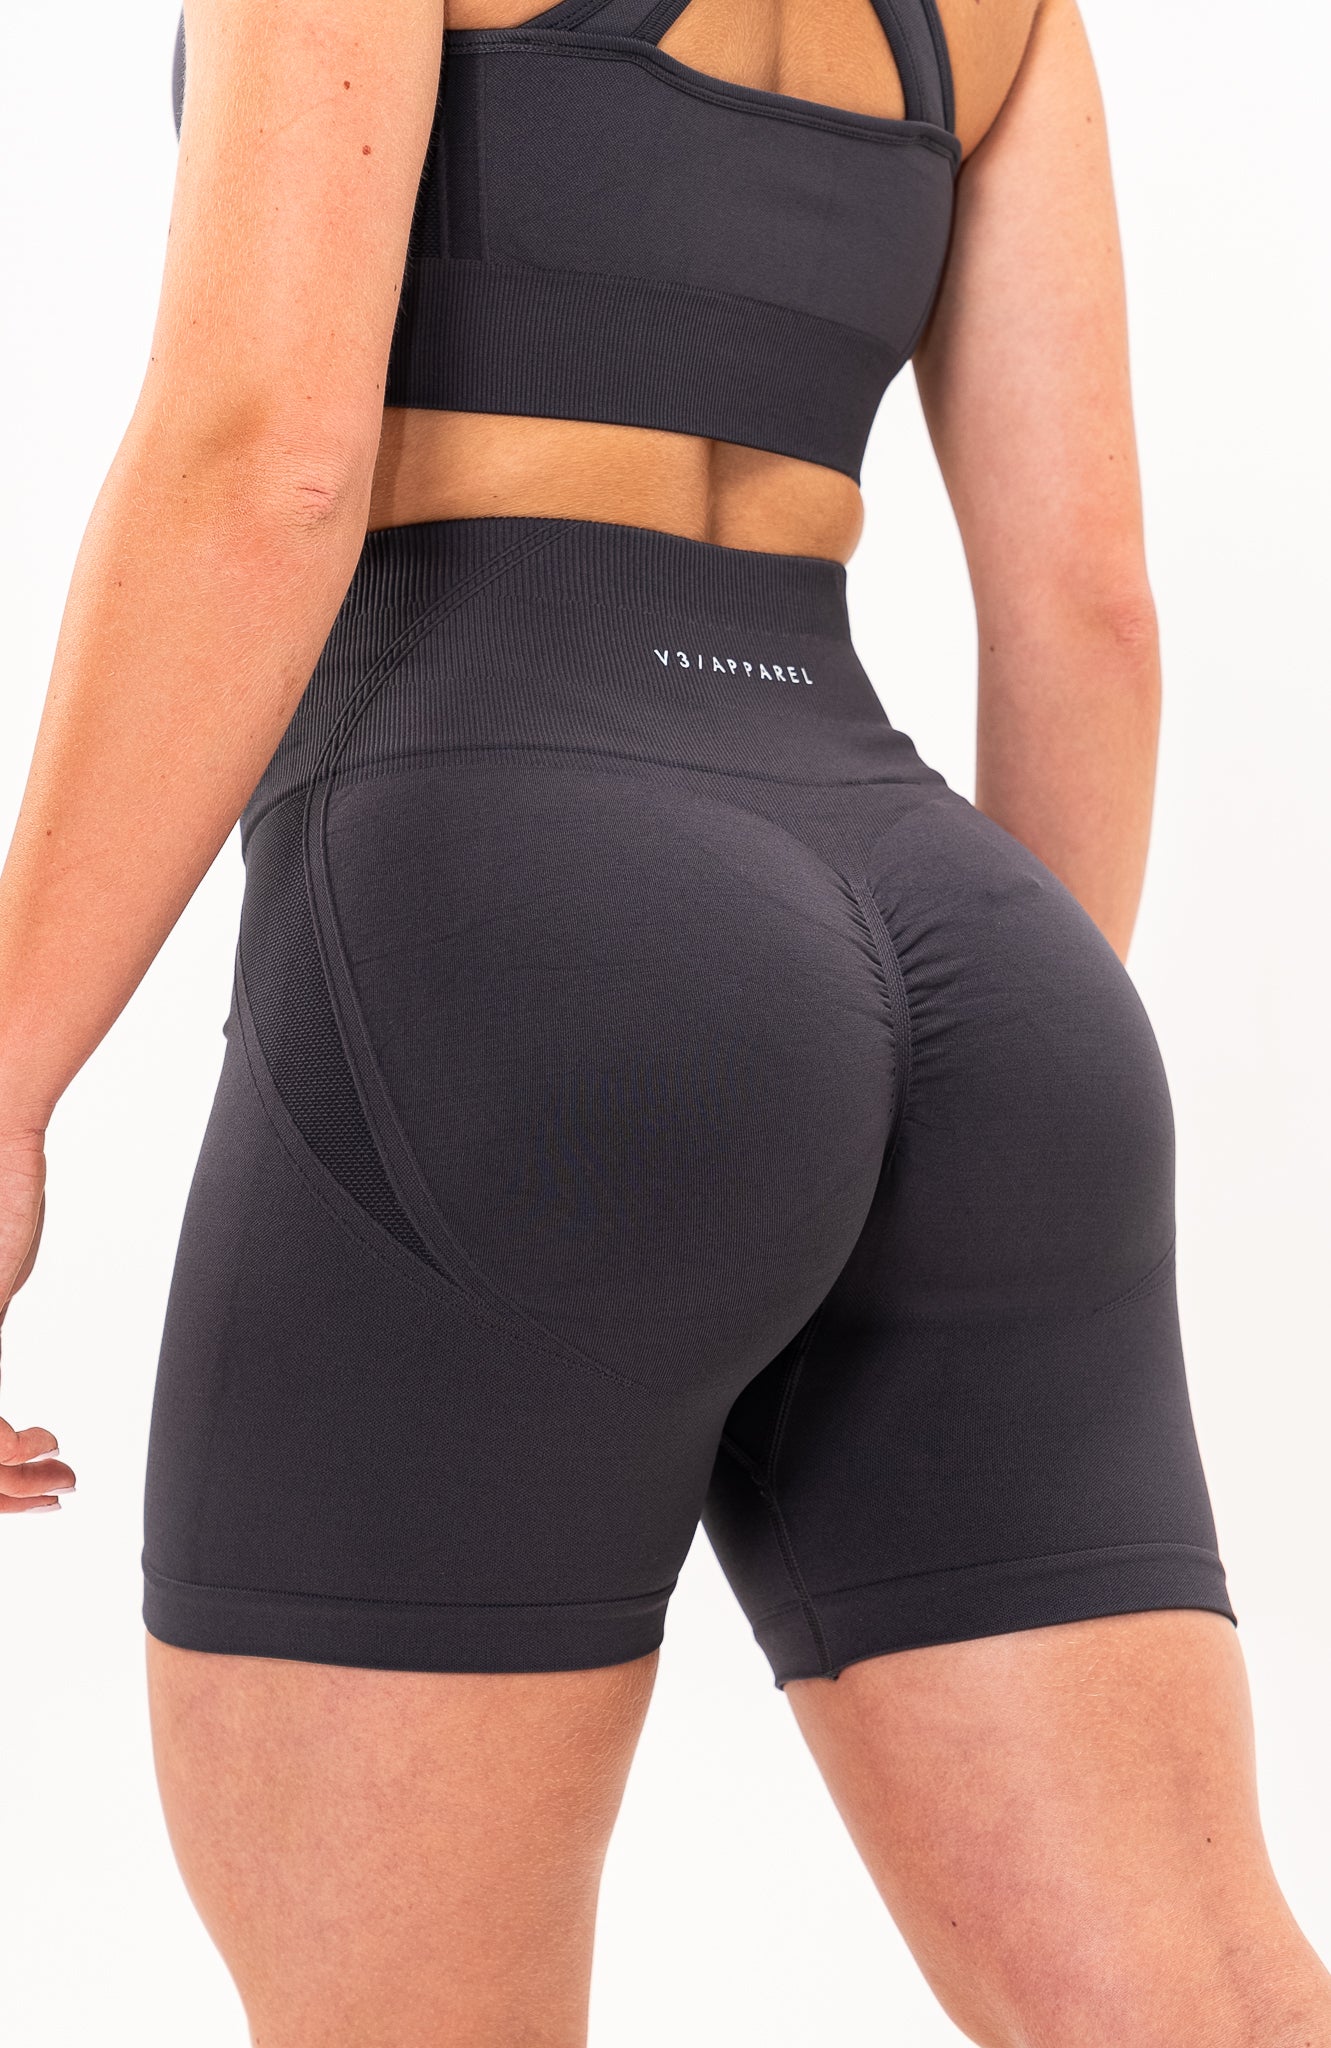 redbaysand Women's Tempo seamless scrunch bum shaping high waisted cycle shorts in charcoal grey – Squat proof 5 inch leg gym shorts for workouts training, Running, yoga, bodybuilding and bikini fitness.